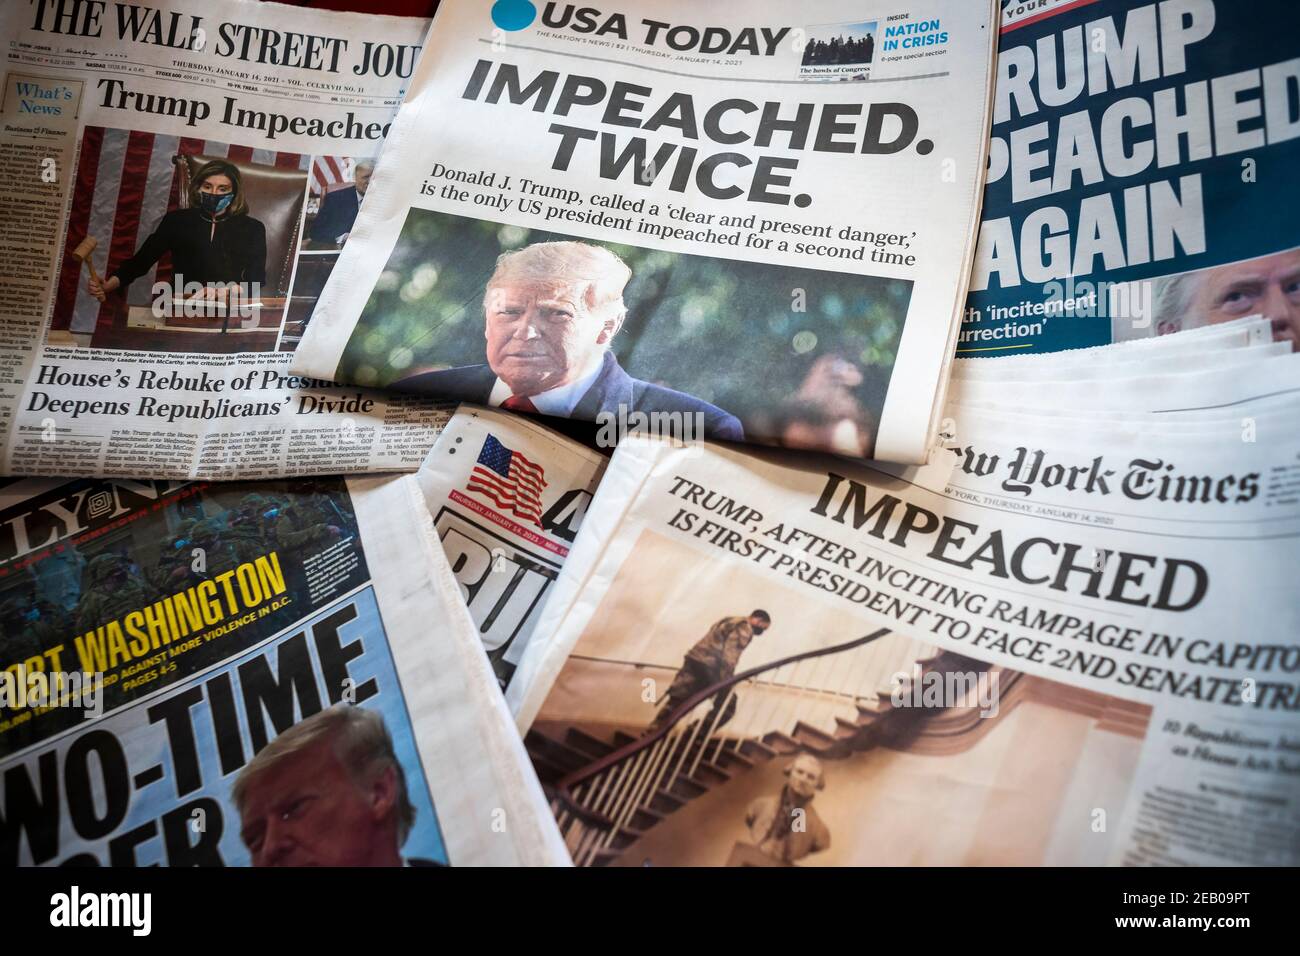 Headlines of newspapers in New York on Thursday, January 14, 2021 report on the second impeachment of President Donald Trump. (© Richard B. Levine) Stock Photo